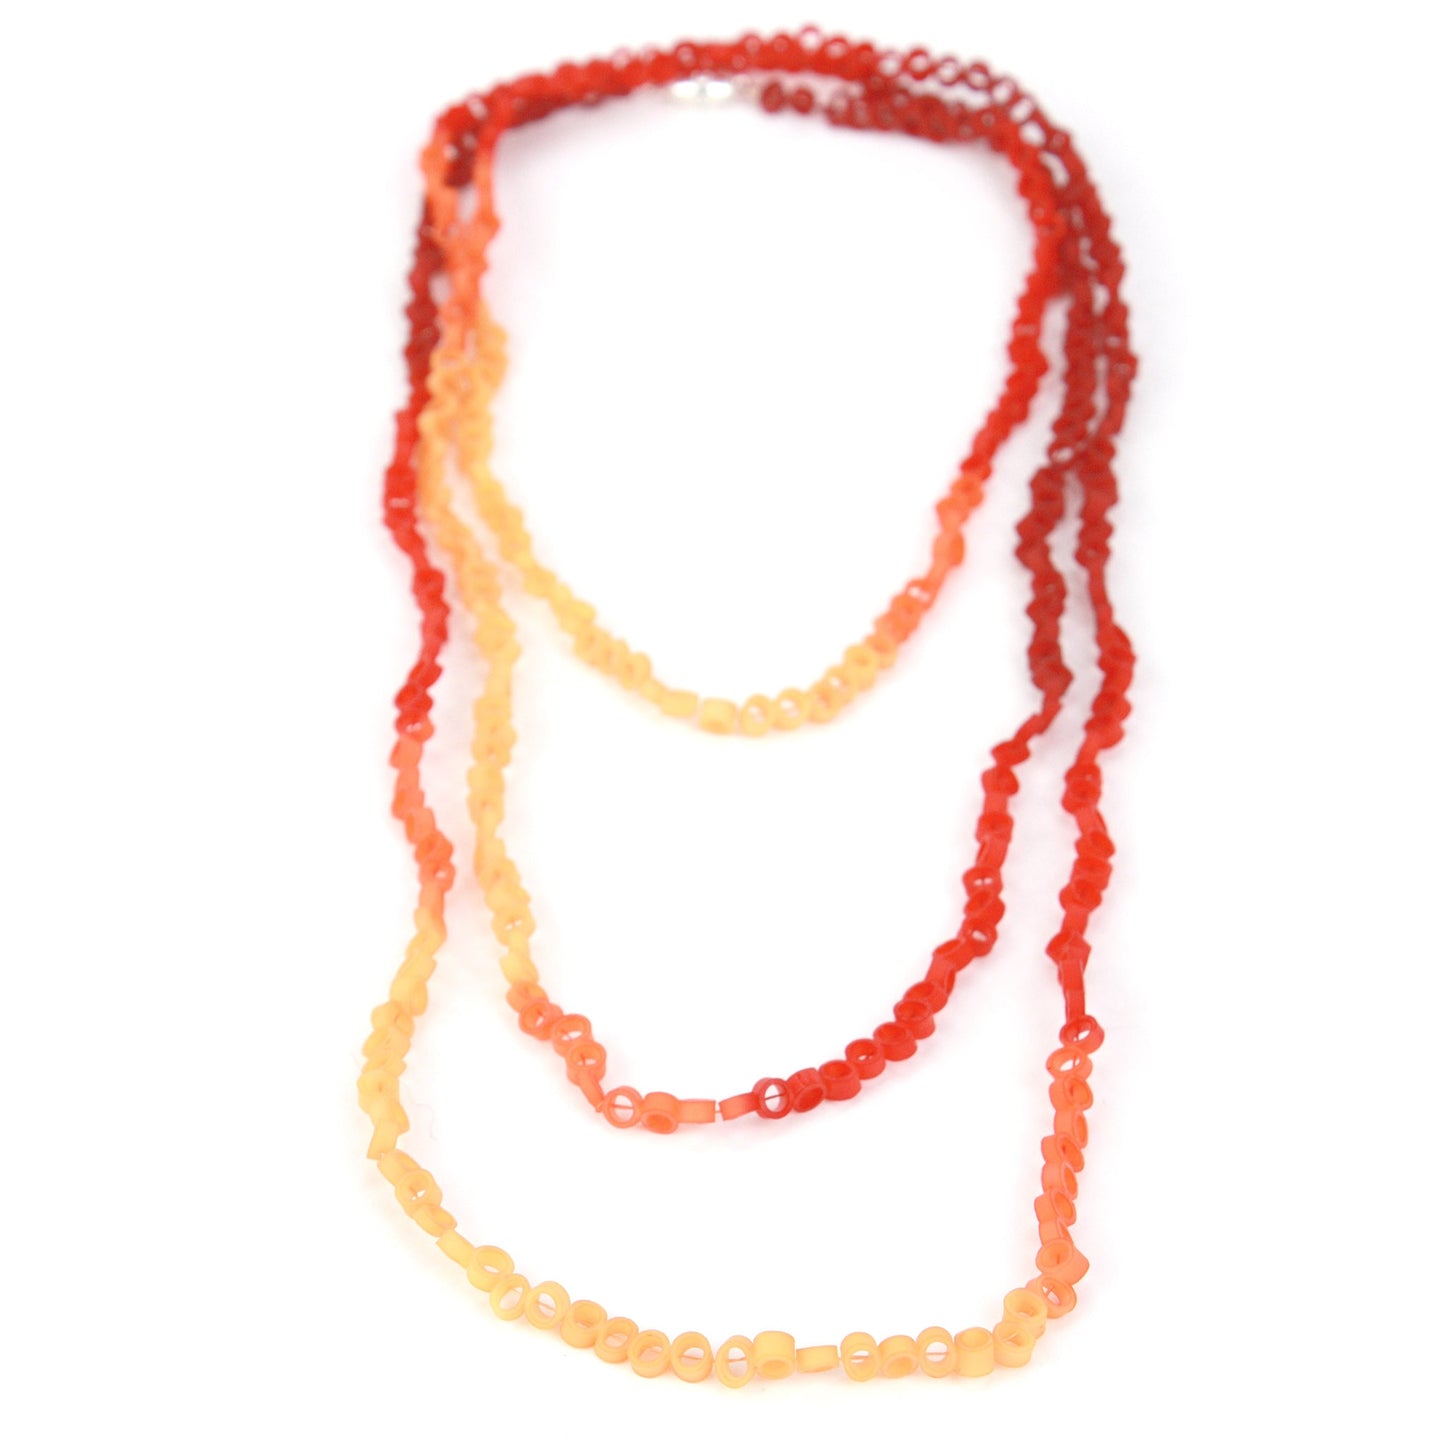 Little links necklace - Red and orange